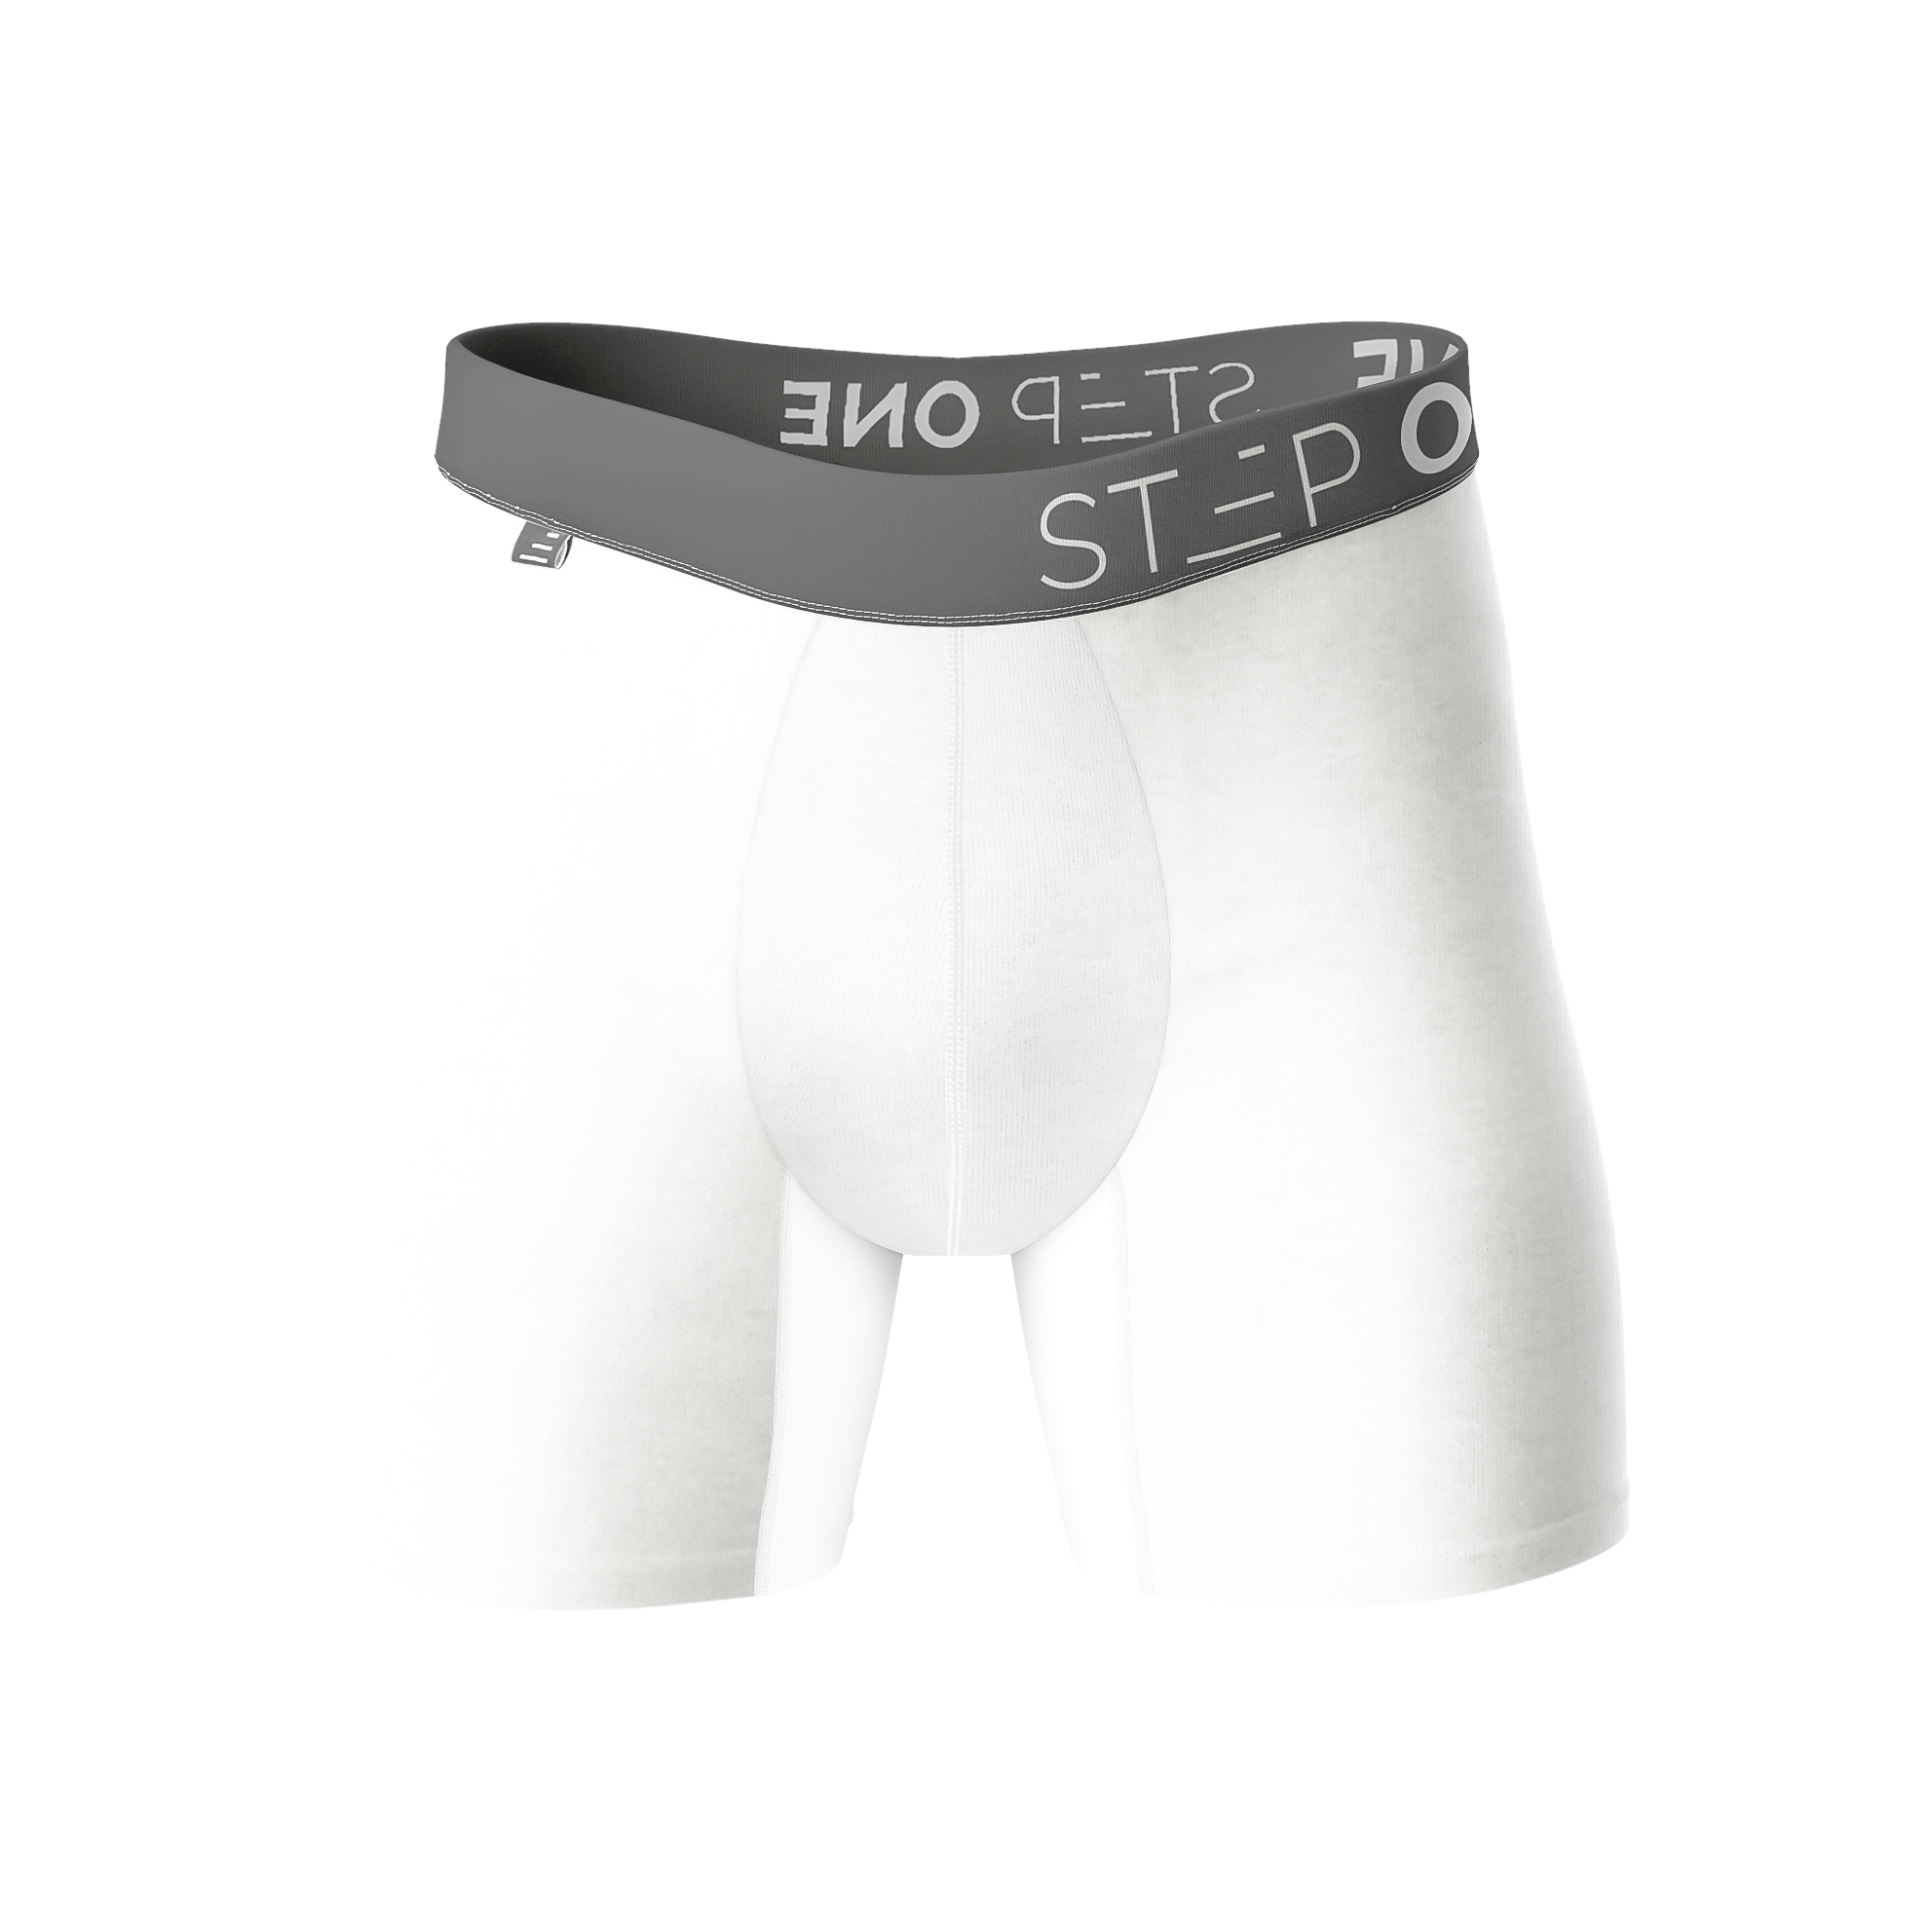 Step One Men's Bamboo Underwear Questions